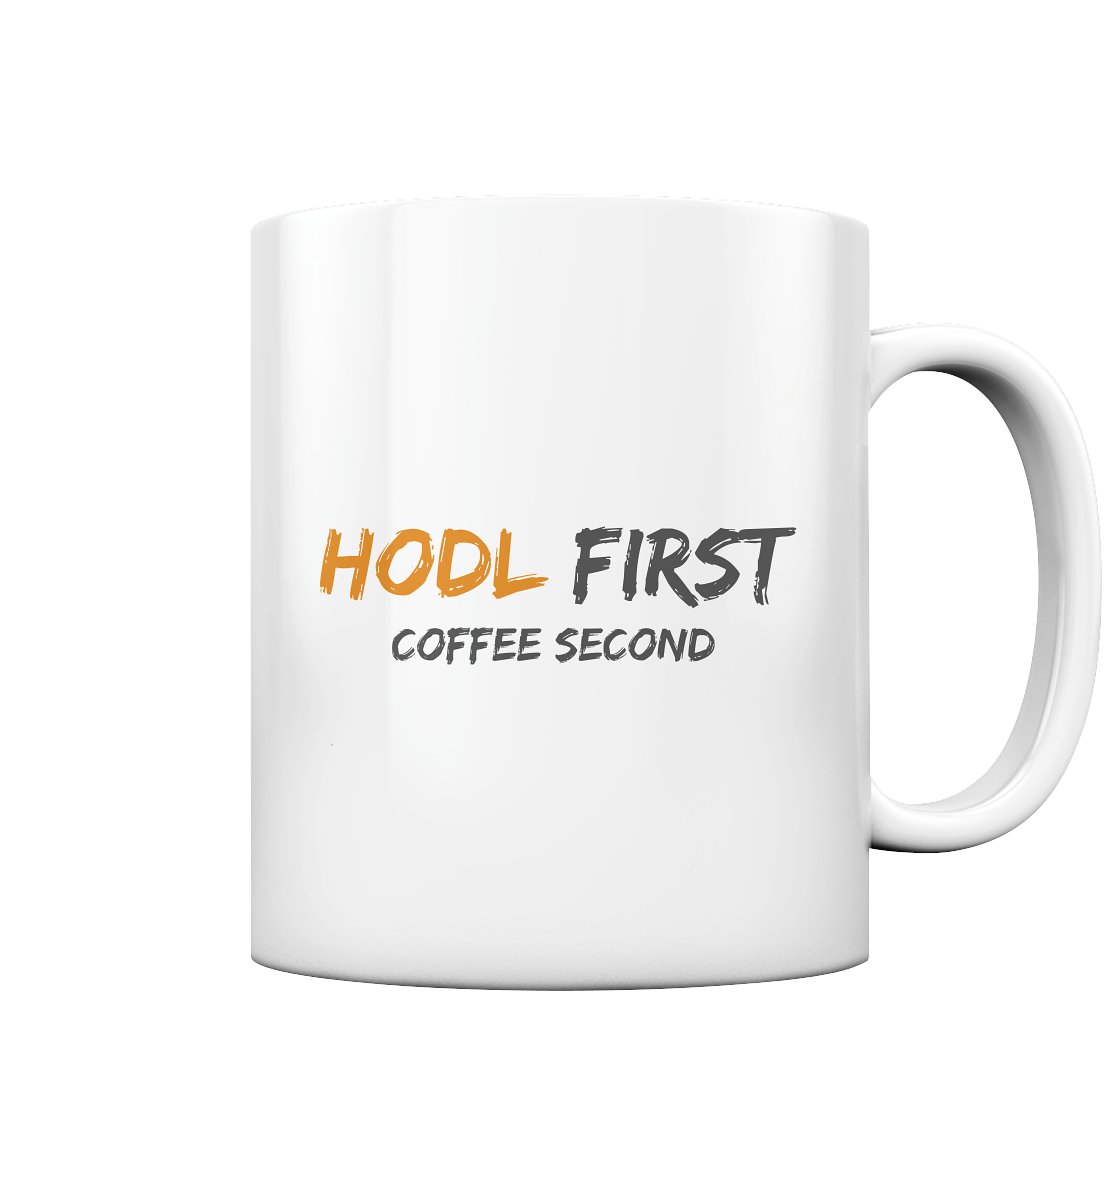 No matter the current price, #Hodler remain resilient. 
And with our #Bitcoin Cup from our Sistersite @SatoshiGoodsCOM you'll be stacking your caffeine every morning.

Get it now with Free Worldwide Shipping at satoshigoods.com/en/clothing/ac…
Take one for your friend and get a discount!